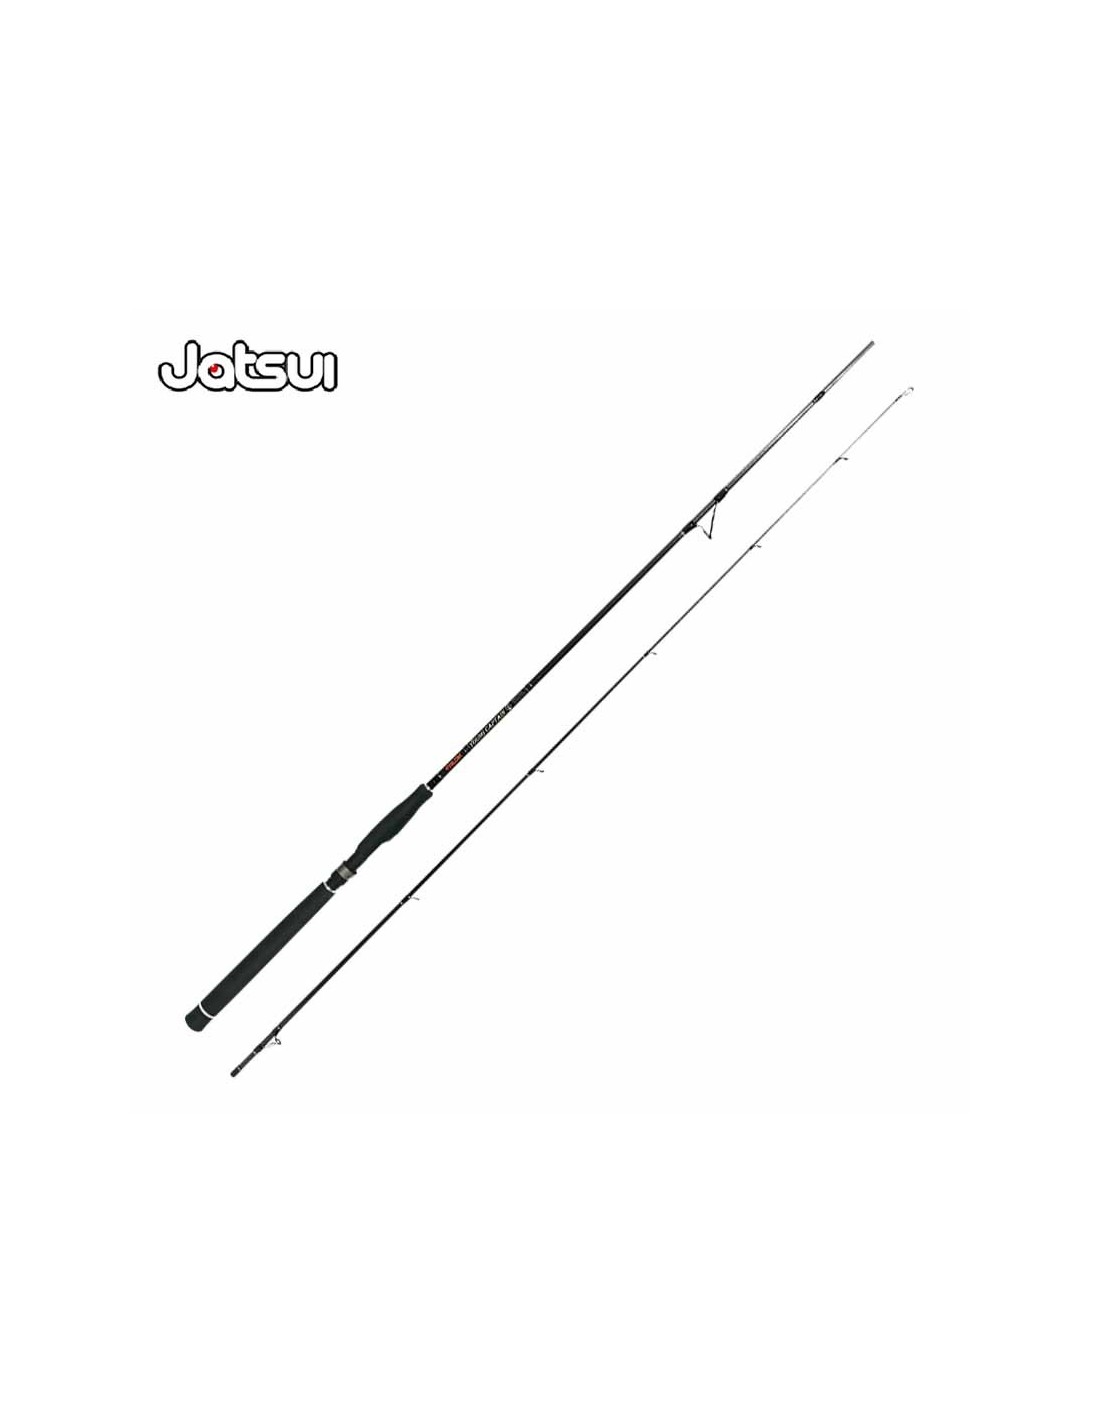 falcon young captain 8 ′ carbon two-piece eging fishing rod